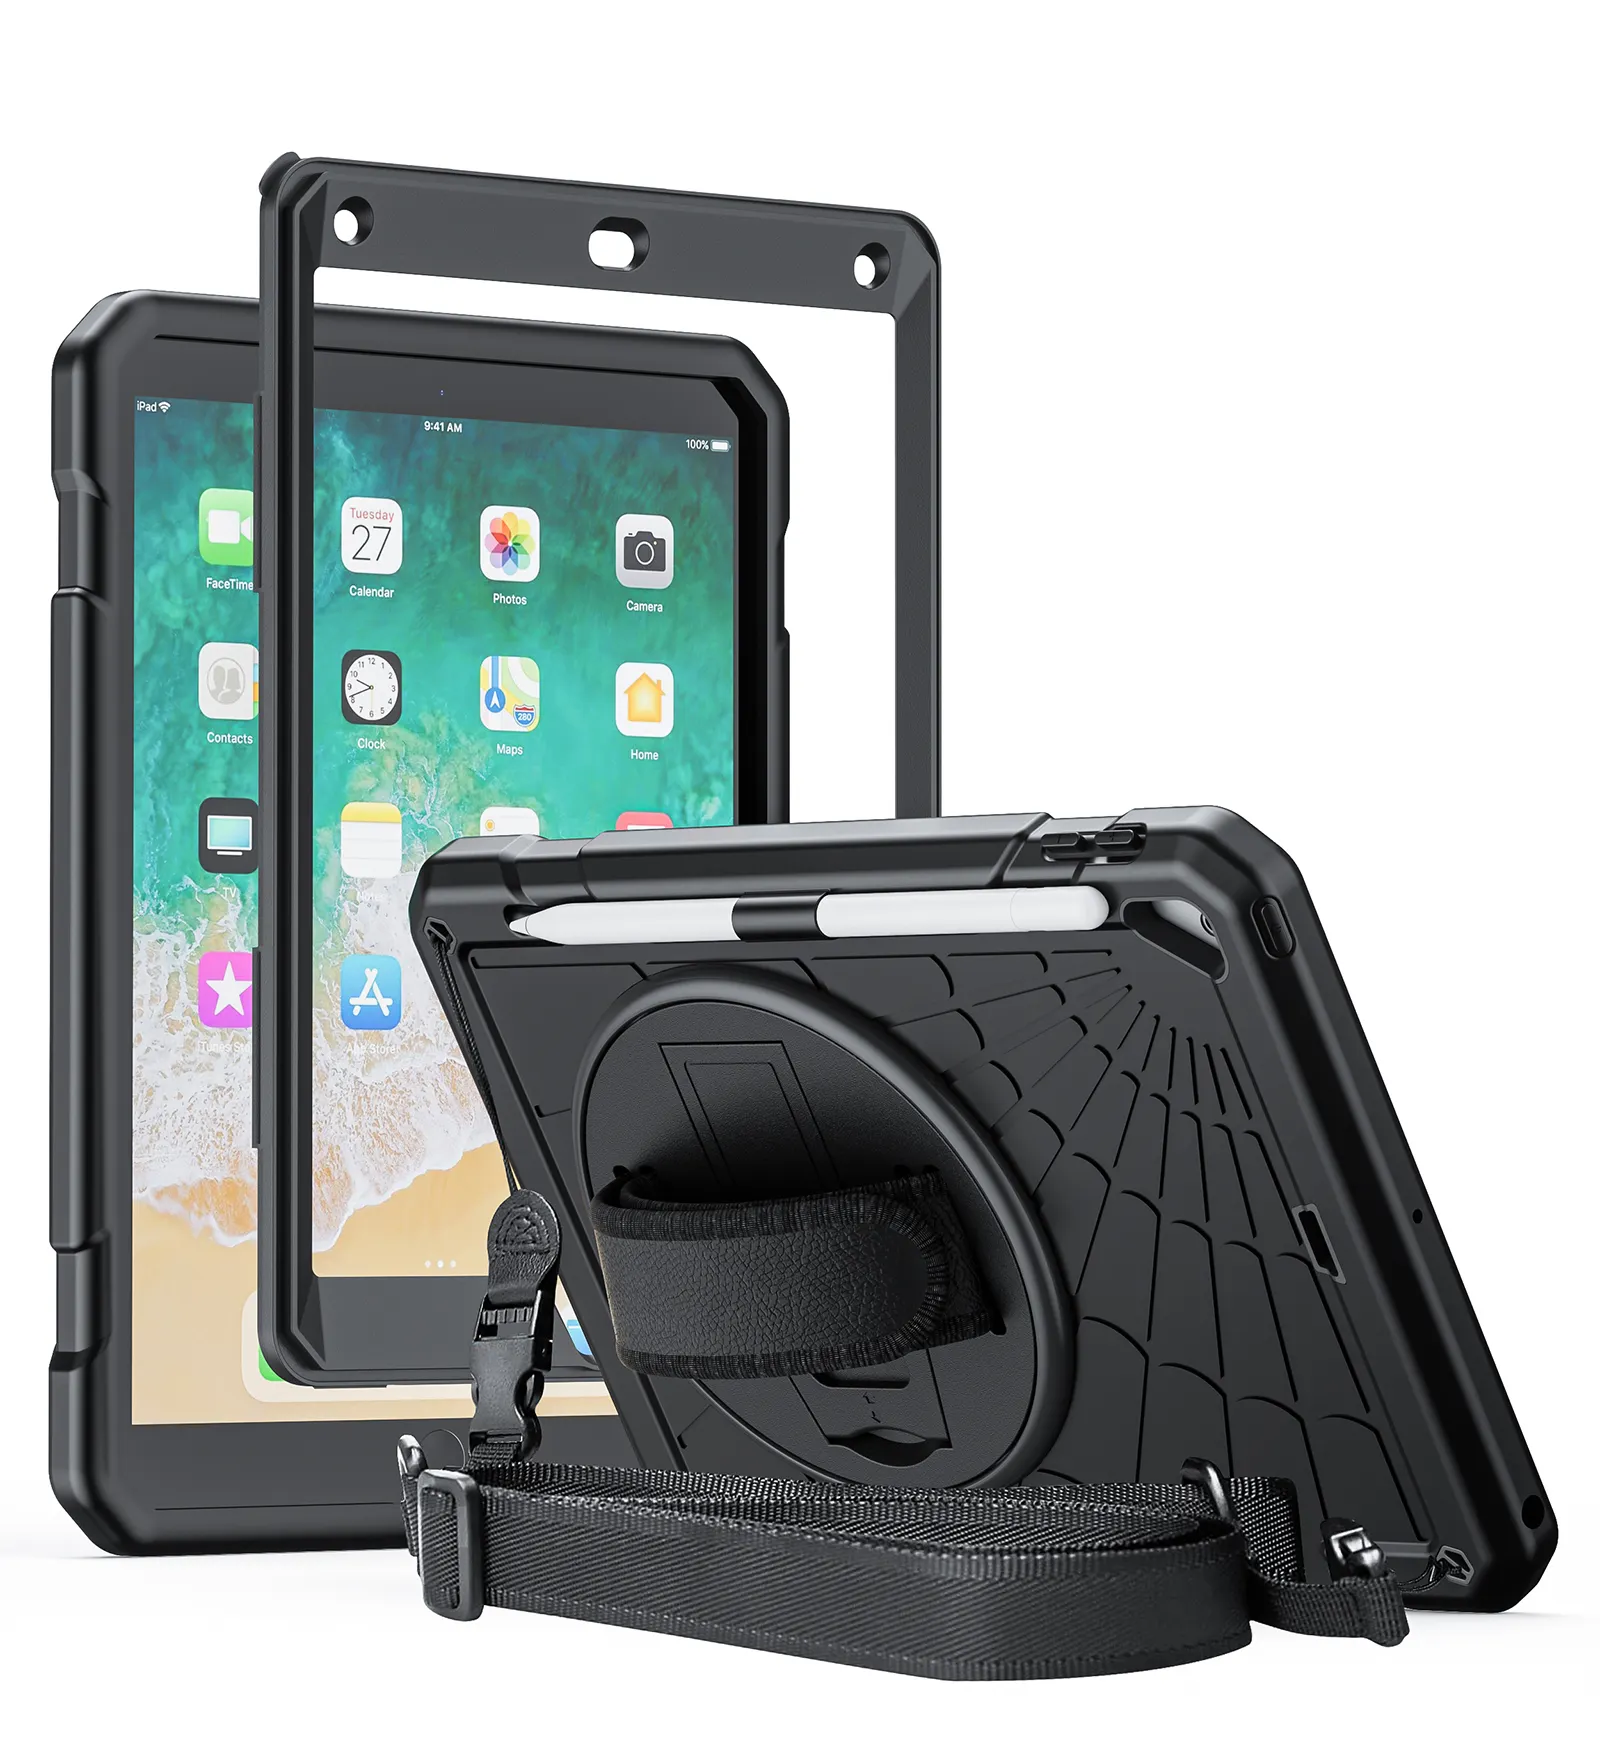 Screen Protector Detachable Kickstand Shockproof Silicone Pc Hybrid Rugged 9.7 Inch Tablet Case For Ipad 5 6 air pro Back Cover